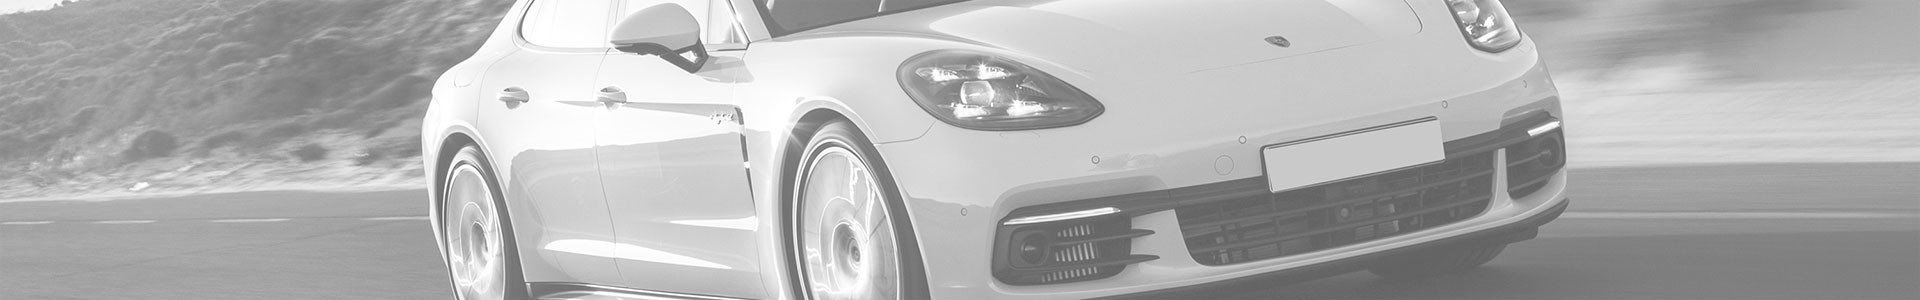 Porsche Panamera common problems and solutions